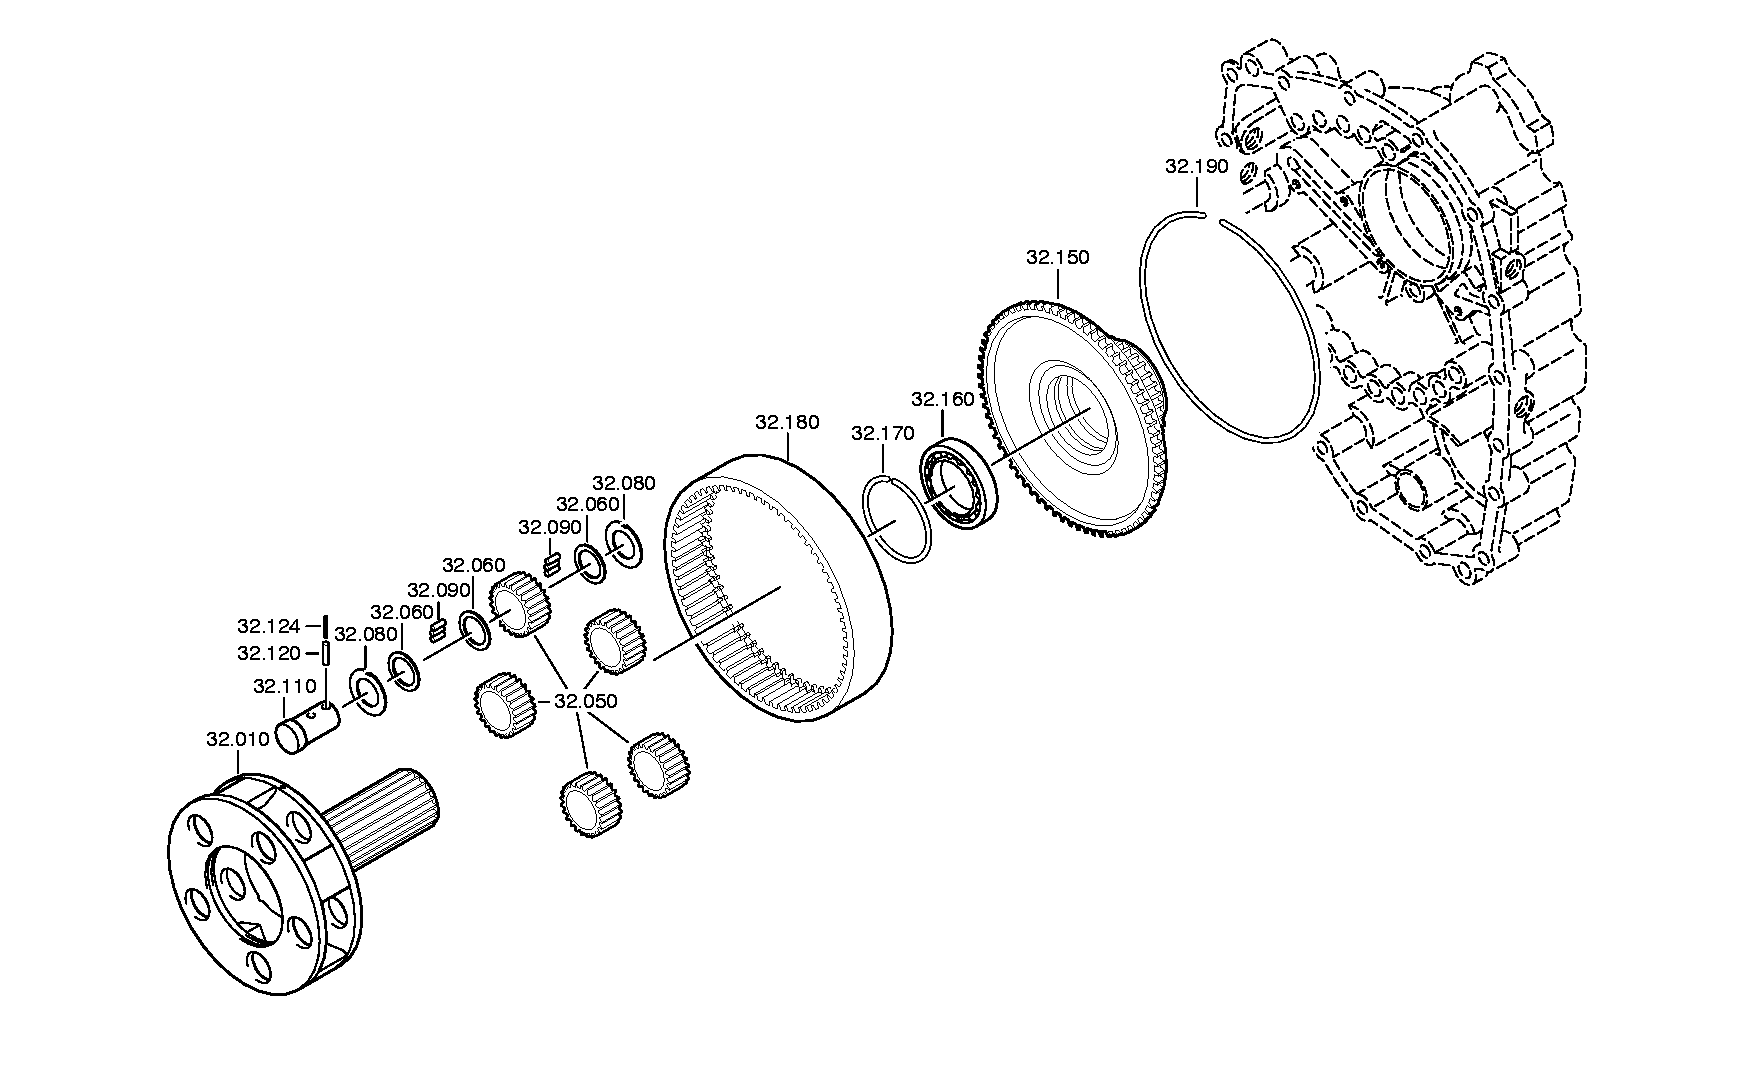 drawing for ASIA MOTORS CO. INC. 409-01-0365 - PLANET CARRIER (figure 1)